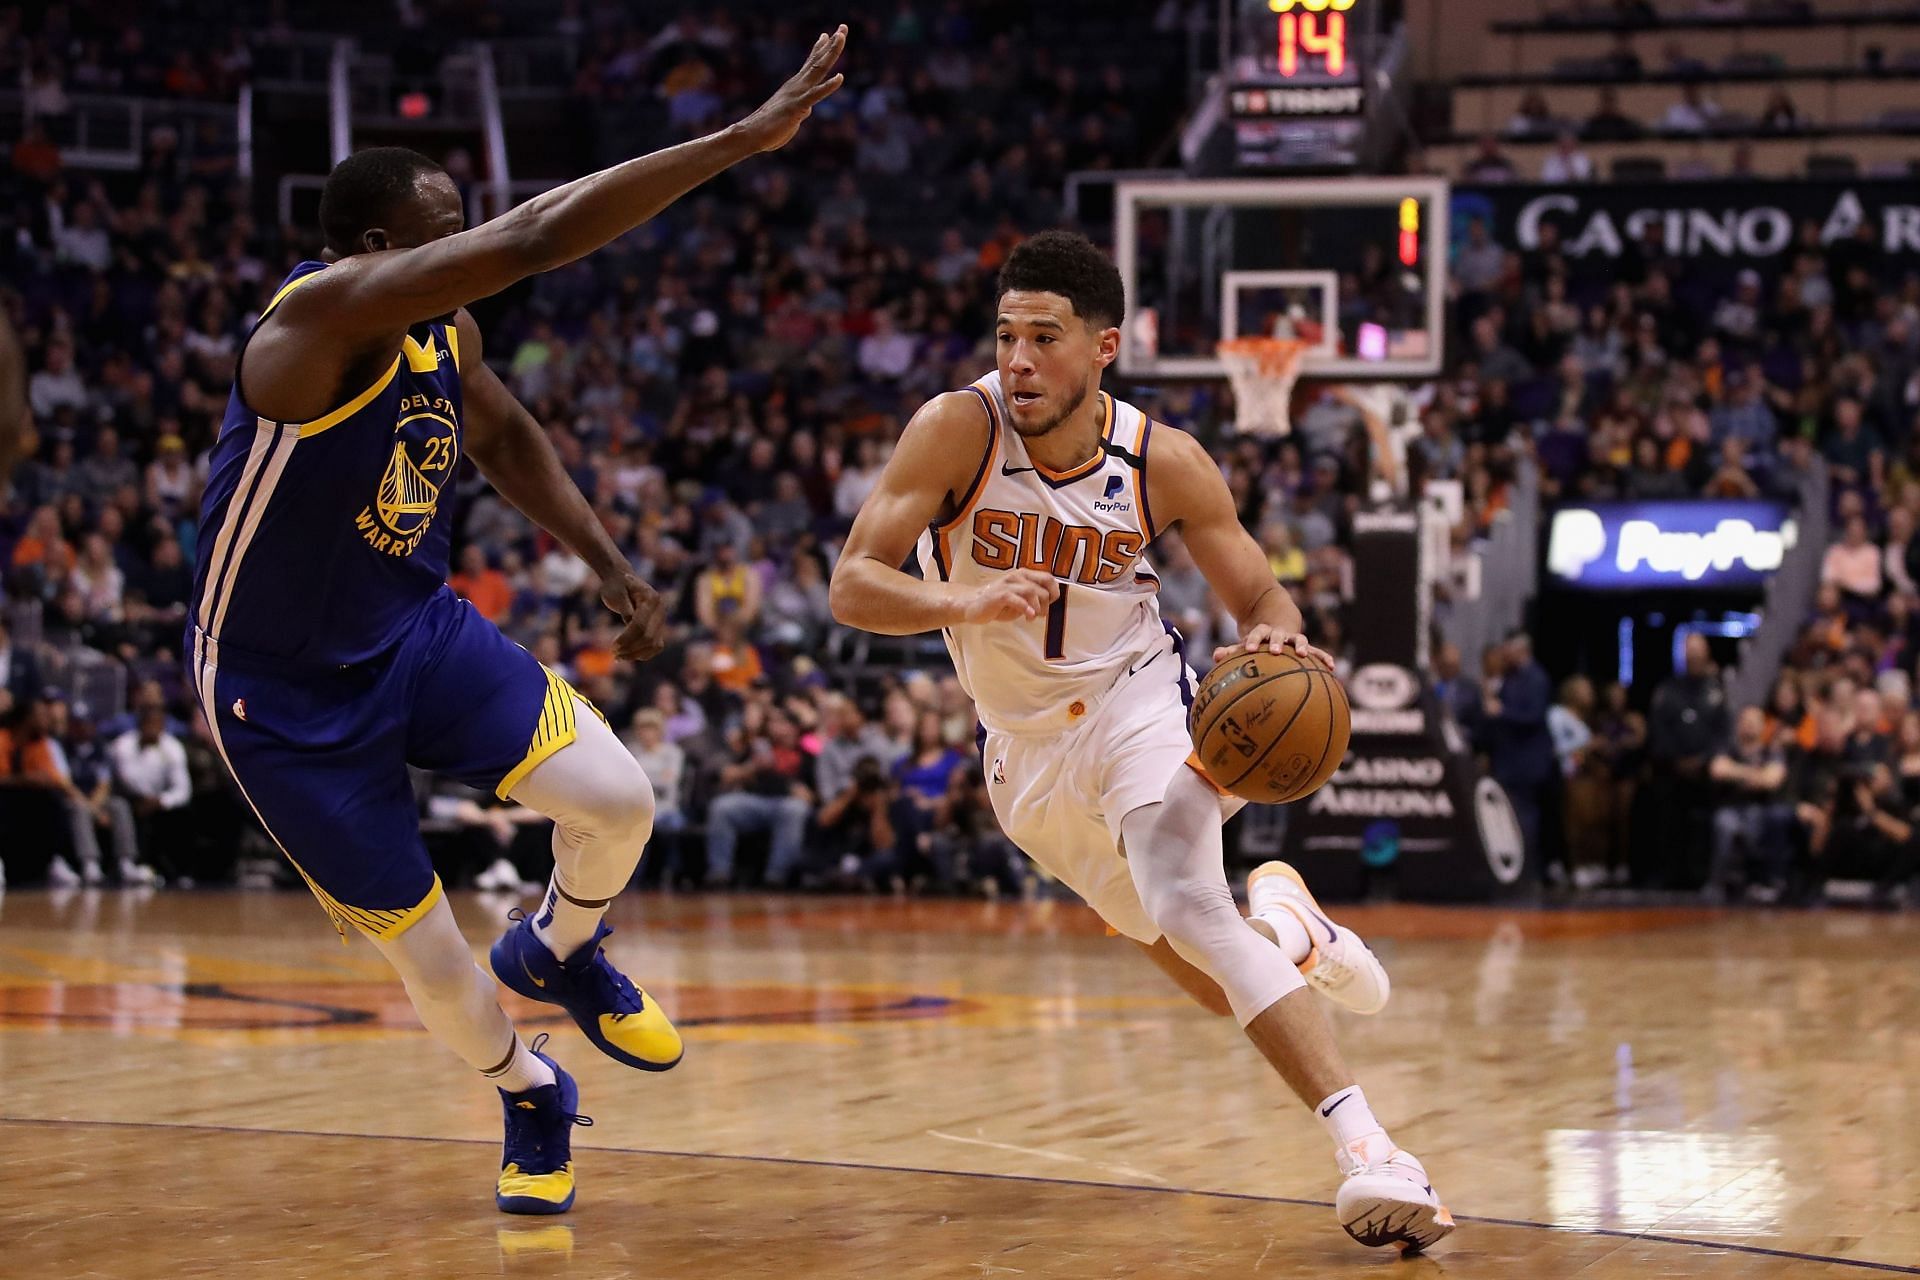 Draymond Green of the Golden State Warriors and Devin Booker of the Phoenix Suns.